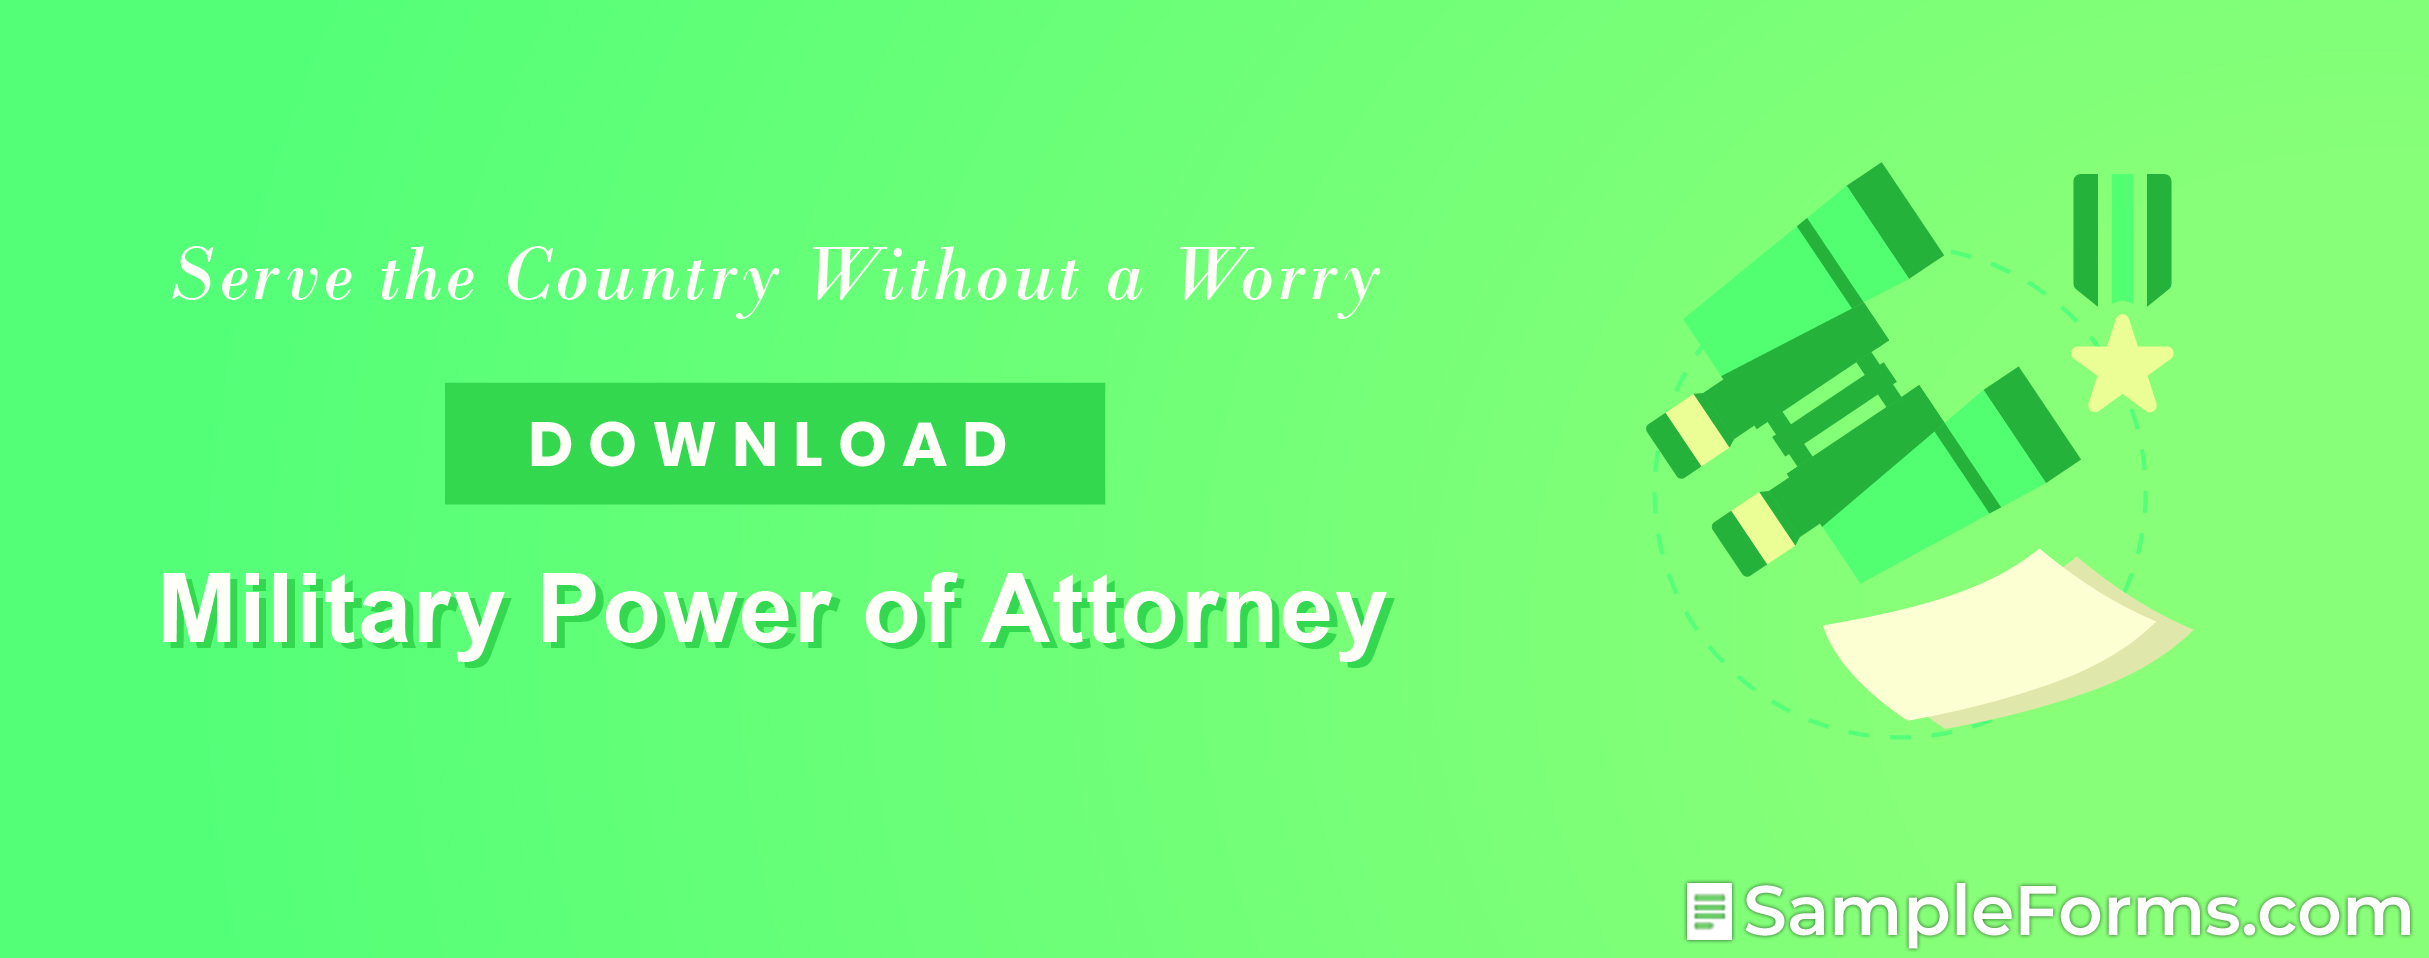 Military Power of Attorney